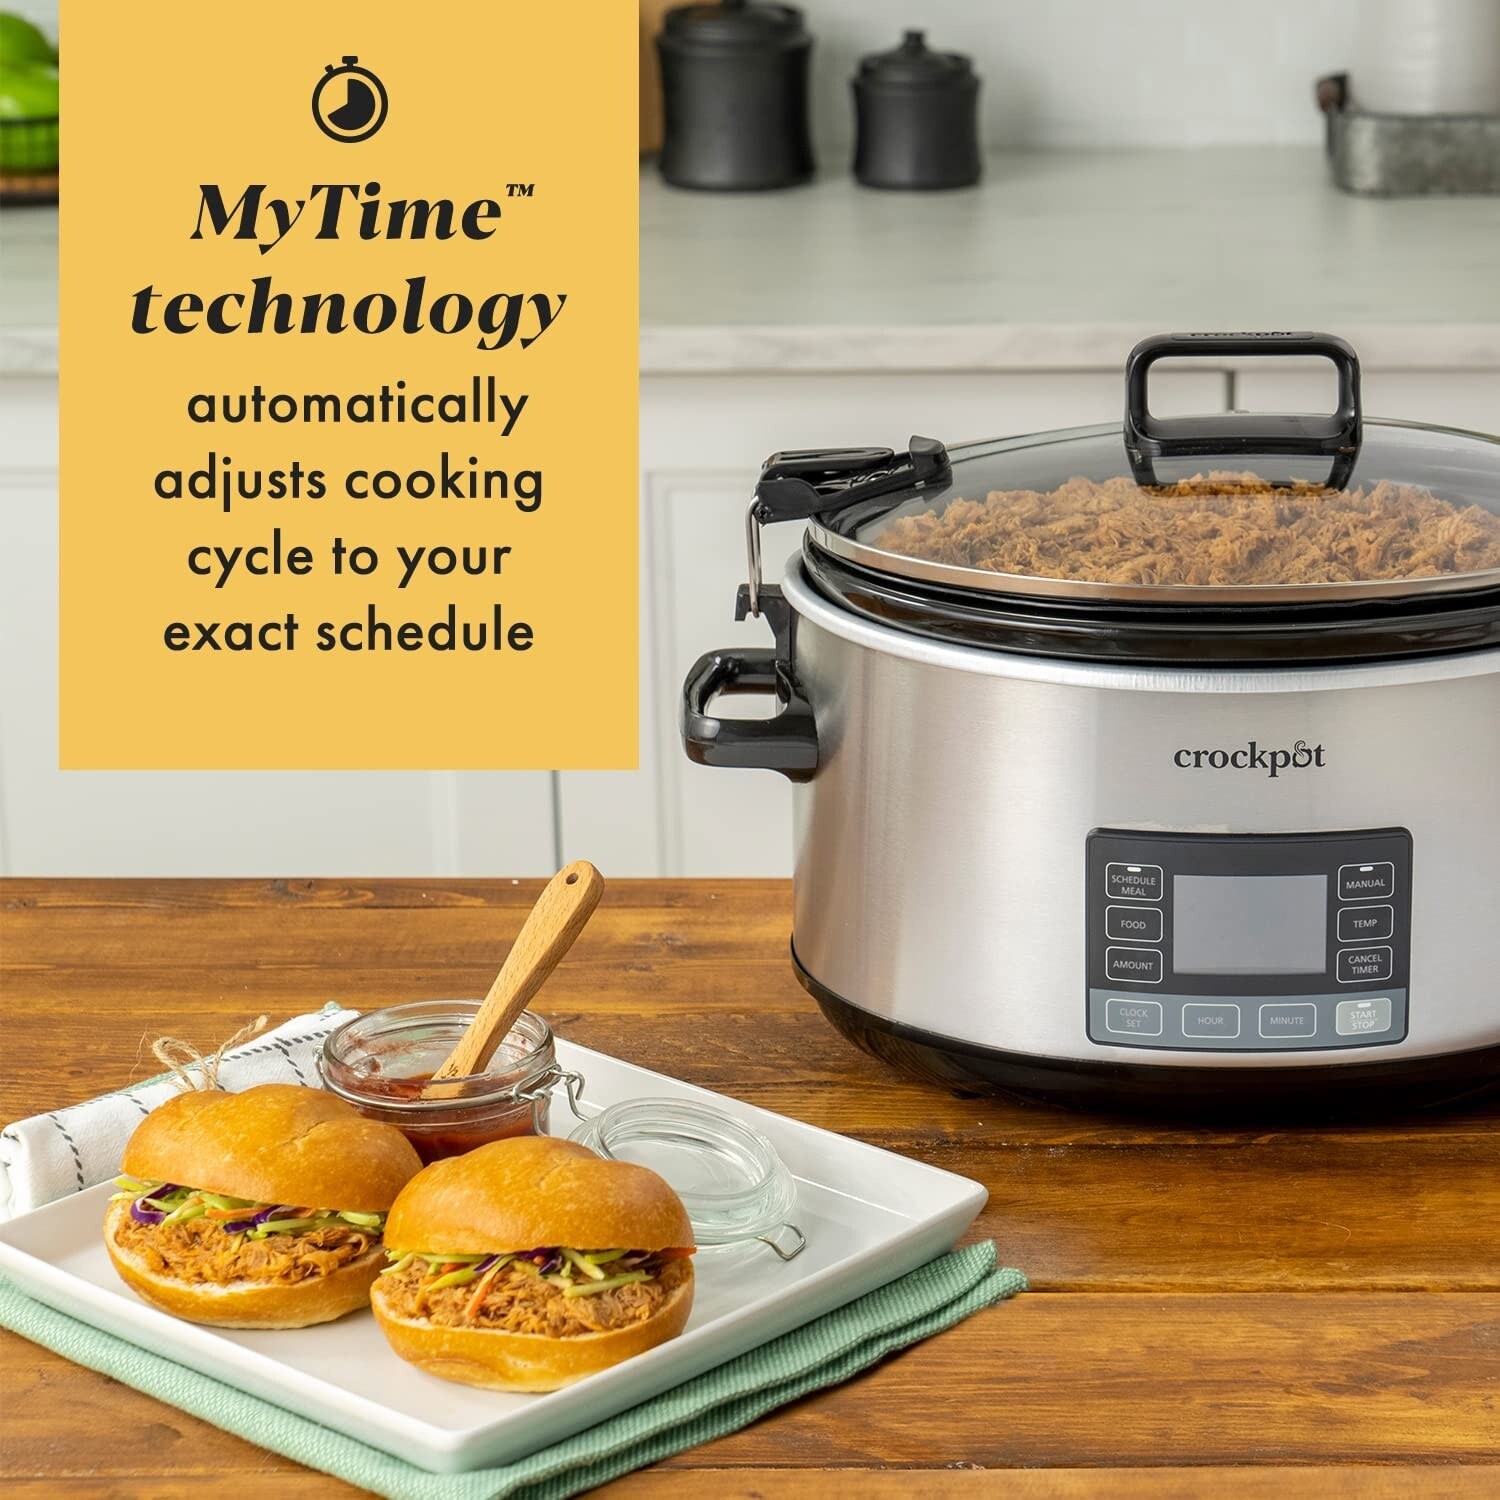 Portable 7 Quart Slow Cooker with Locking Lid and Auto Adjust Cook